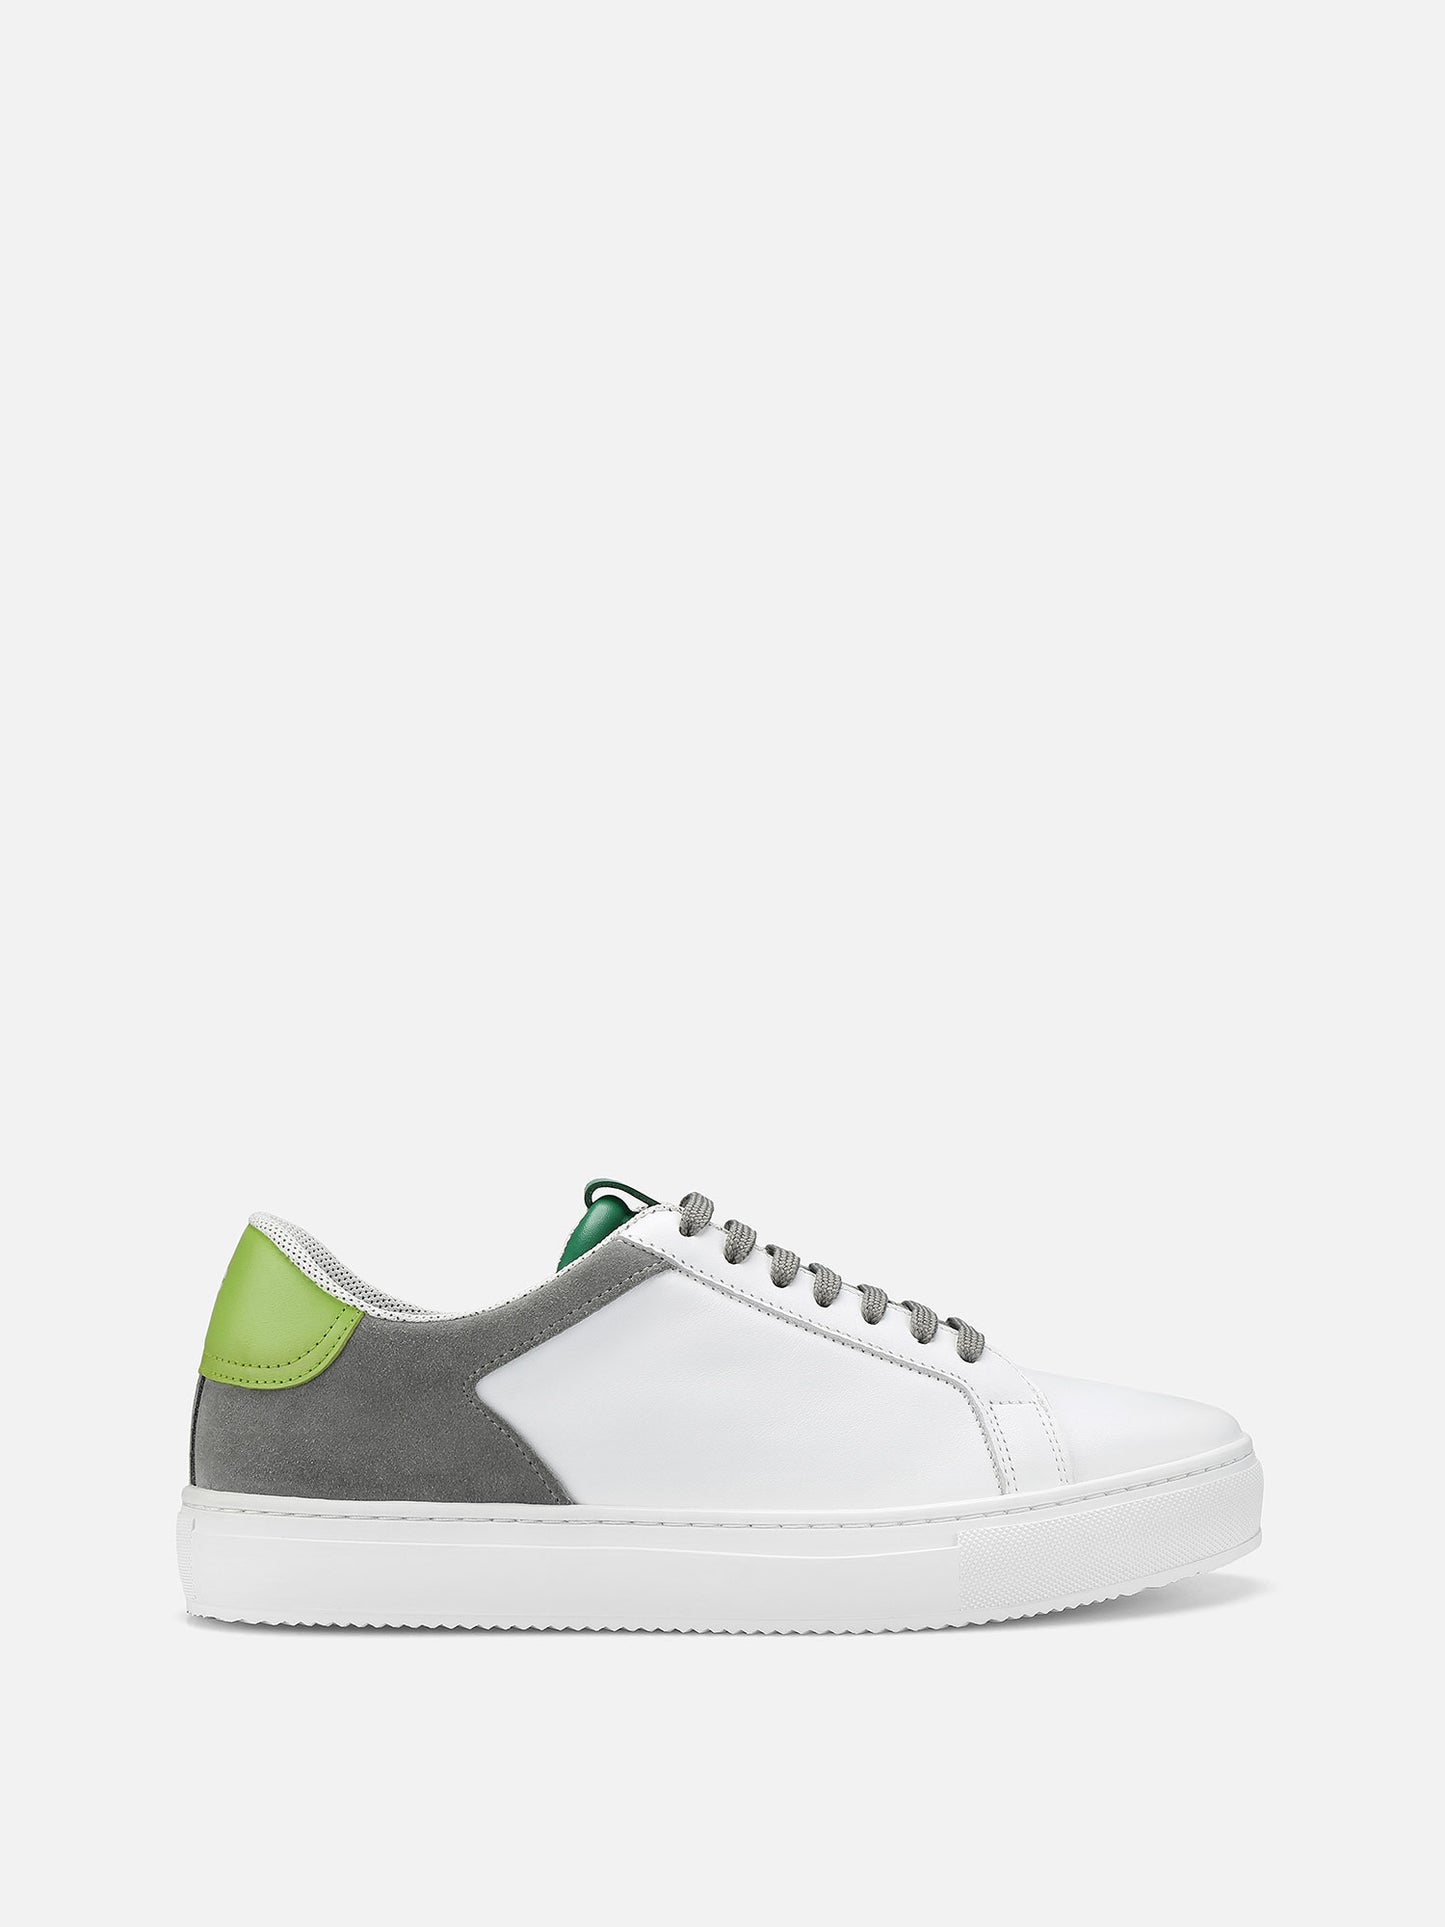 BLUES Leather Sneakers - Green